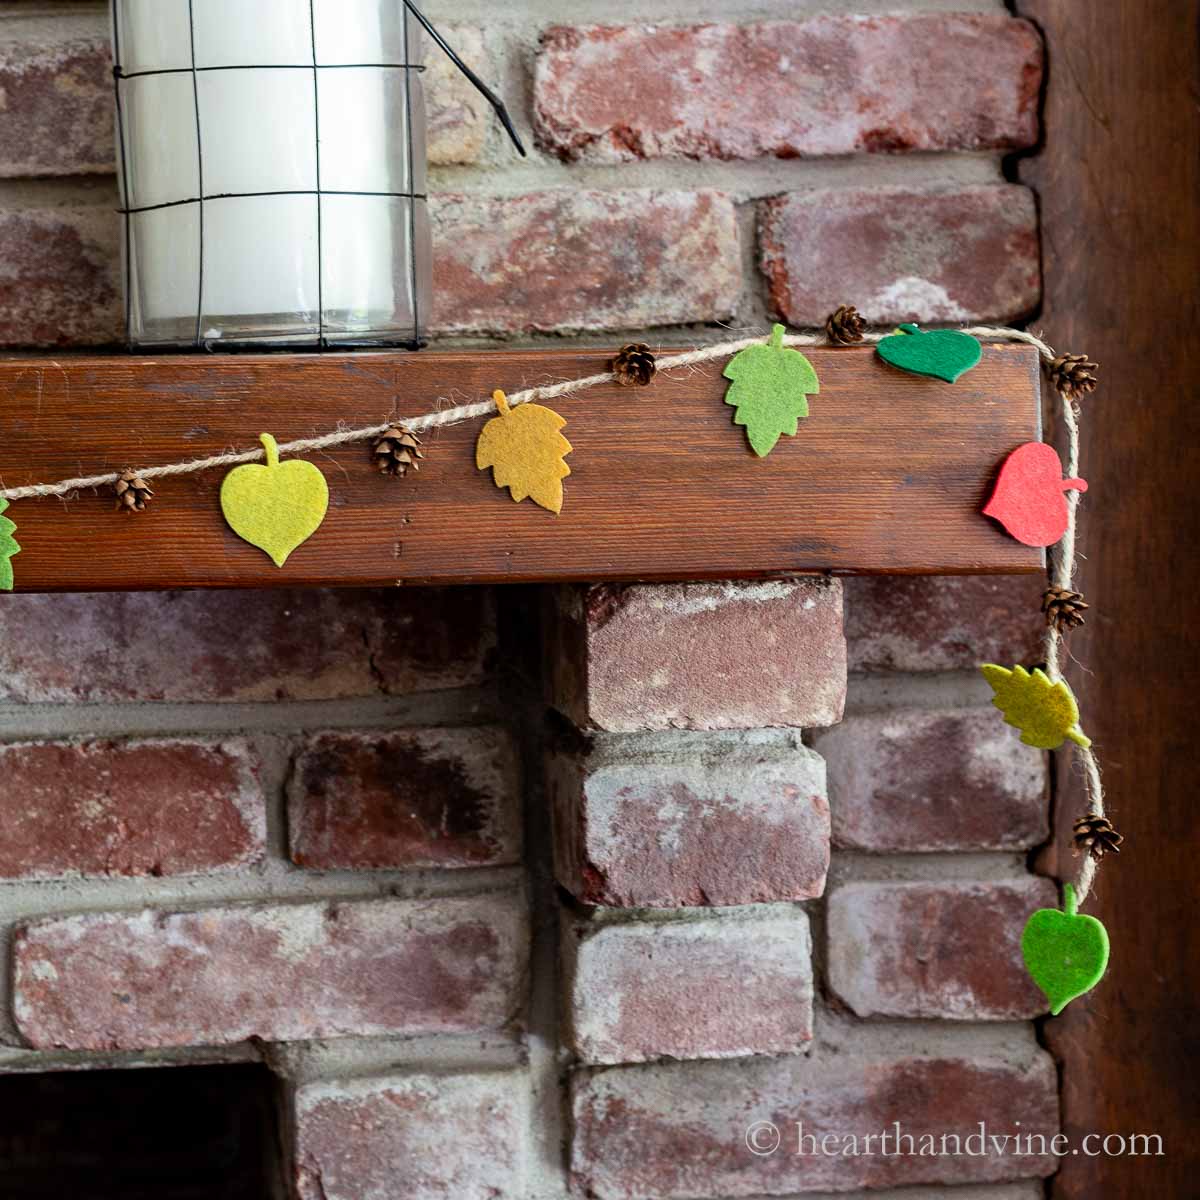 Felt fall leaf and pinecone garland on the corner of a mantel.